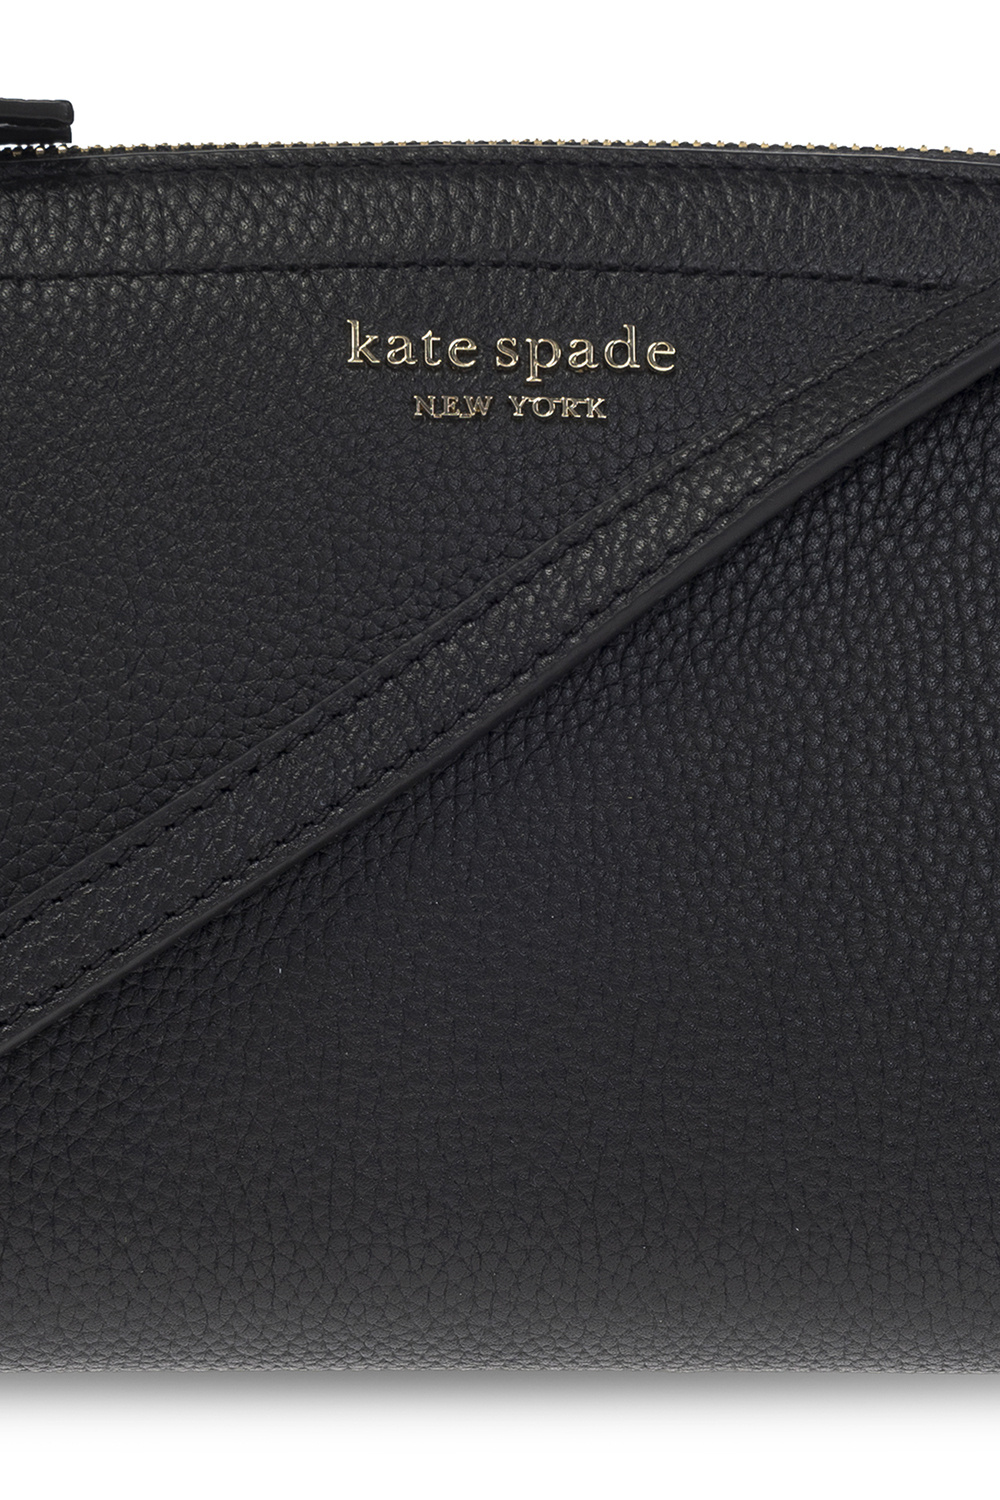 Kate Spade Frame and lashing straps included with pack Graff bag